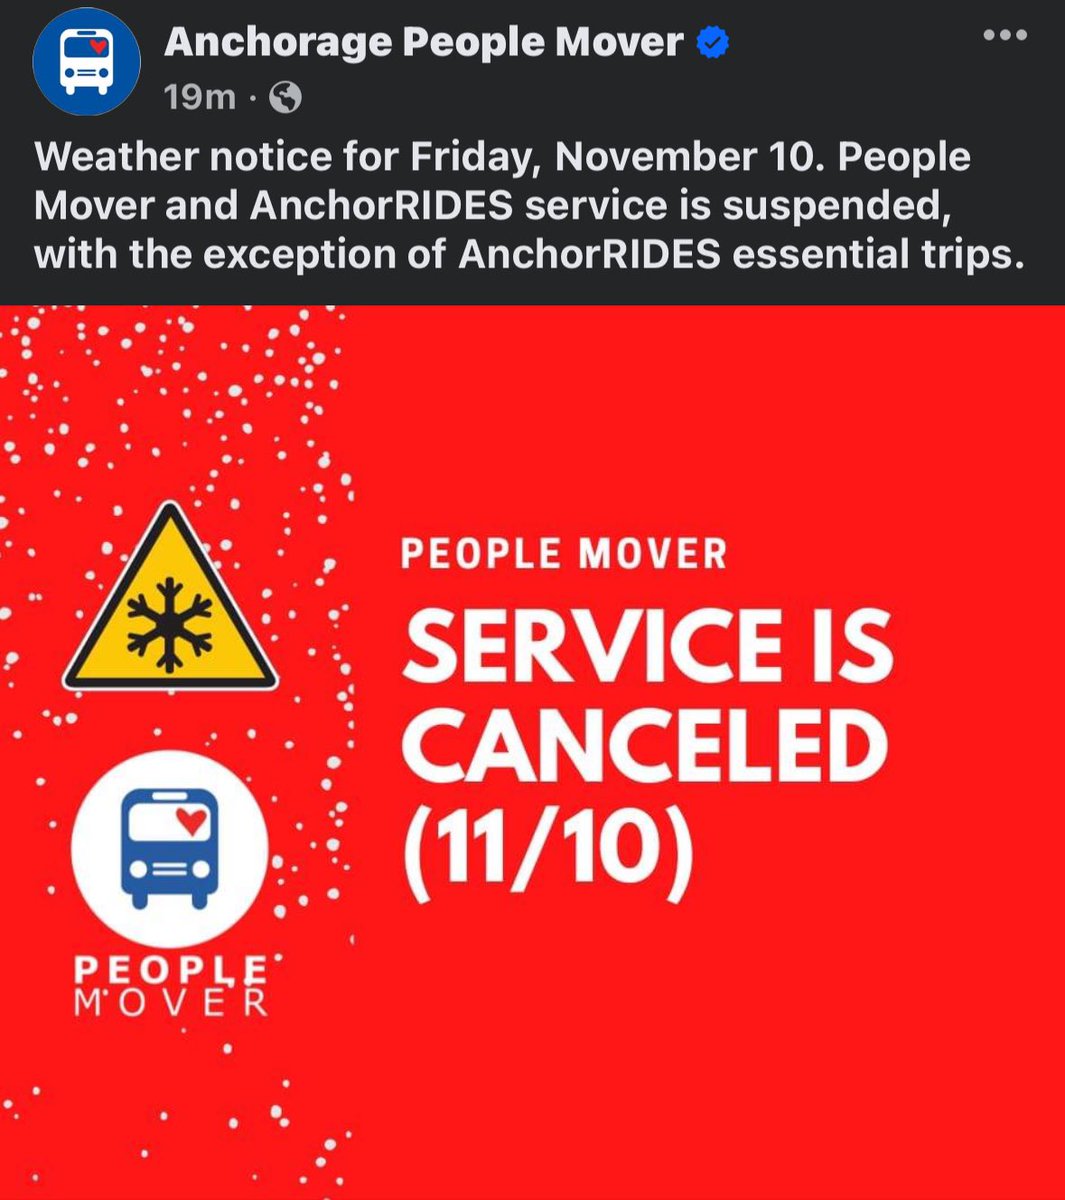 Weather notice for Friday, November 10. People Mover and AnchorRIDES service is suspended, with the exception of AnchorRIDES essential trips.